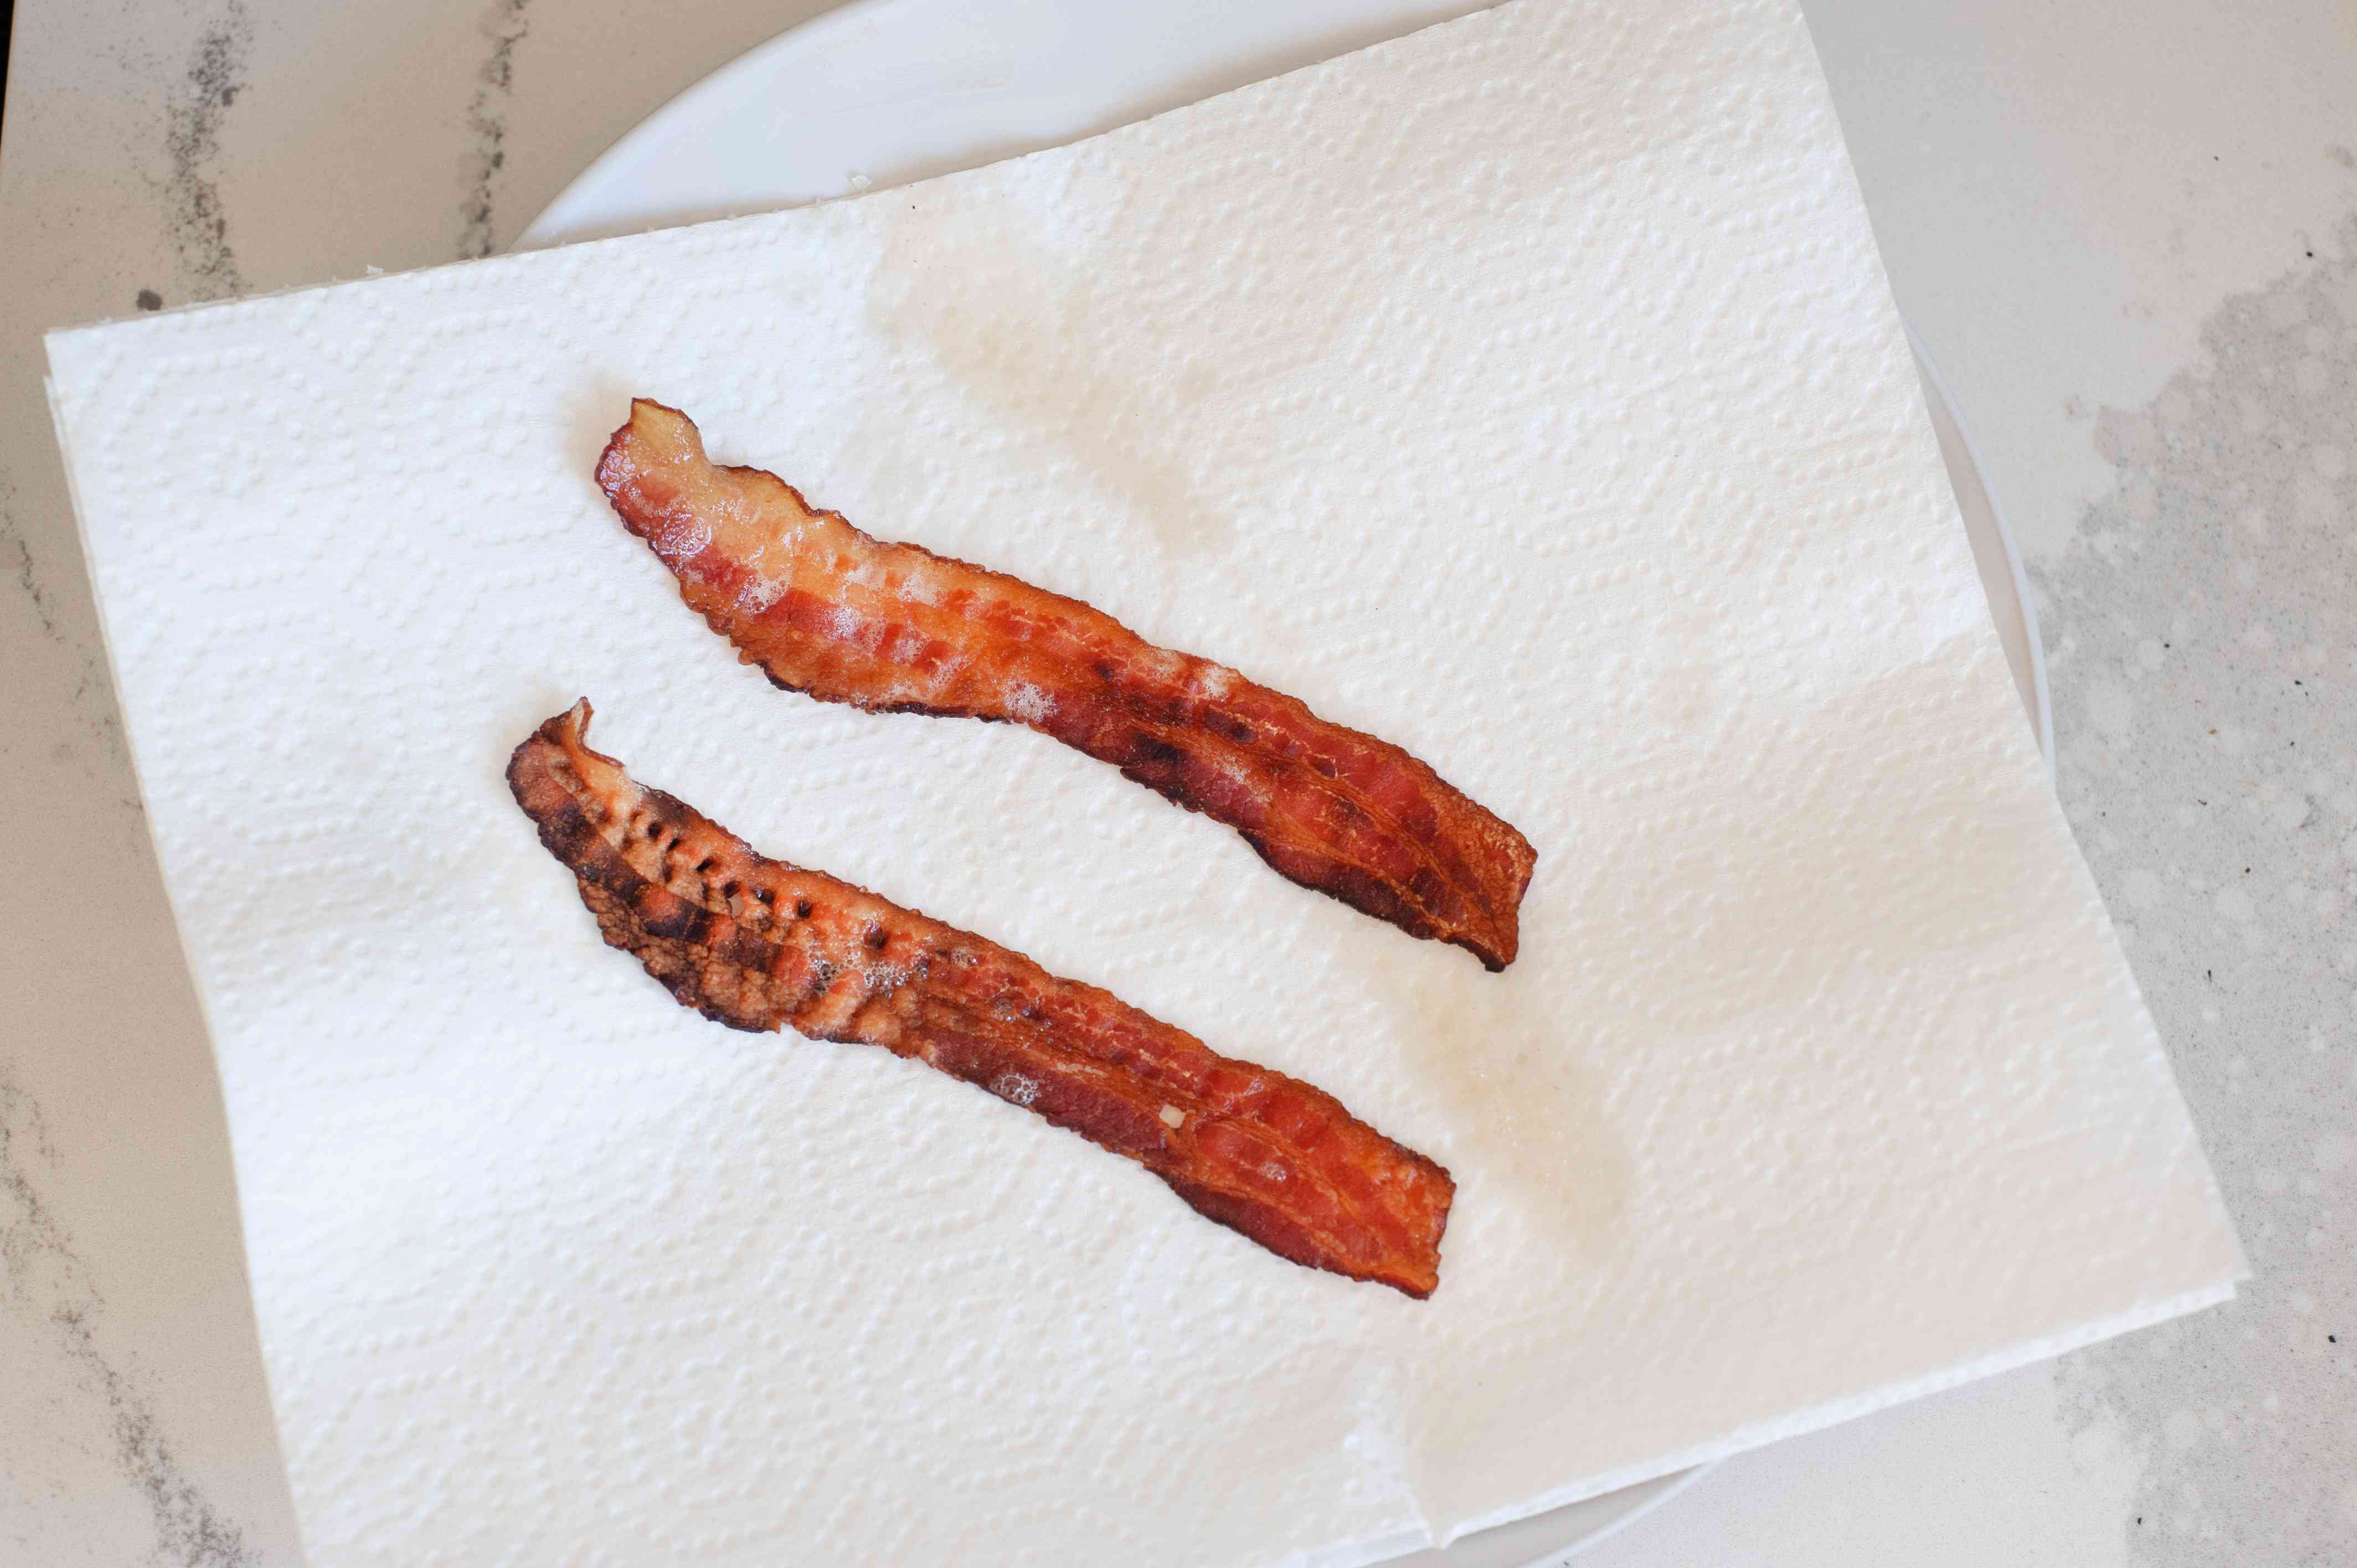 Bacon draining on a paper towel to make summer-y salad with stone fruit and frisée